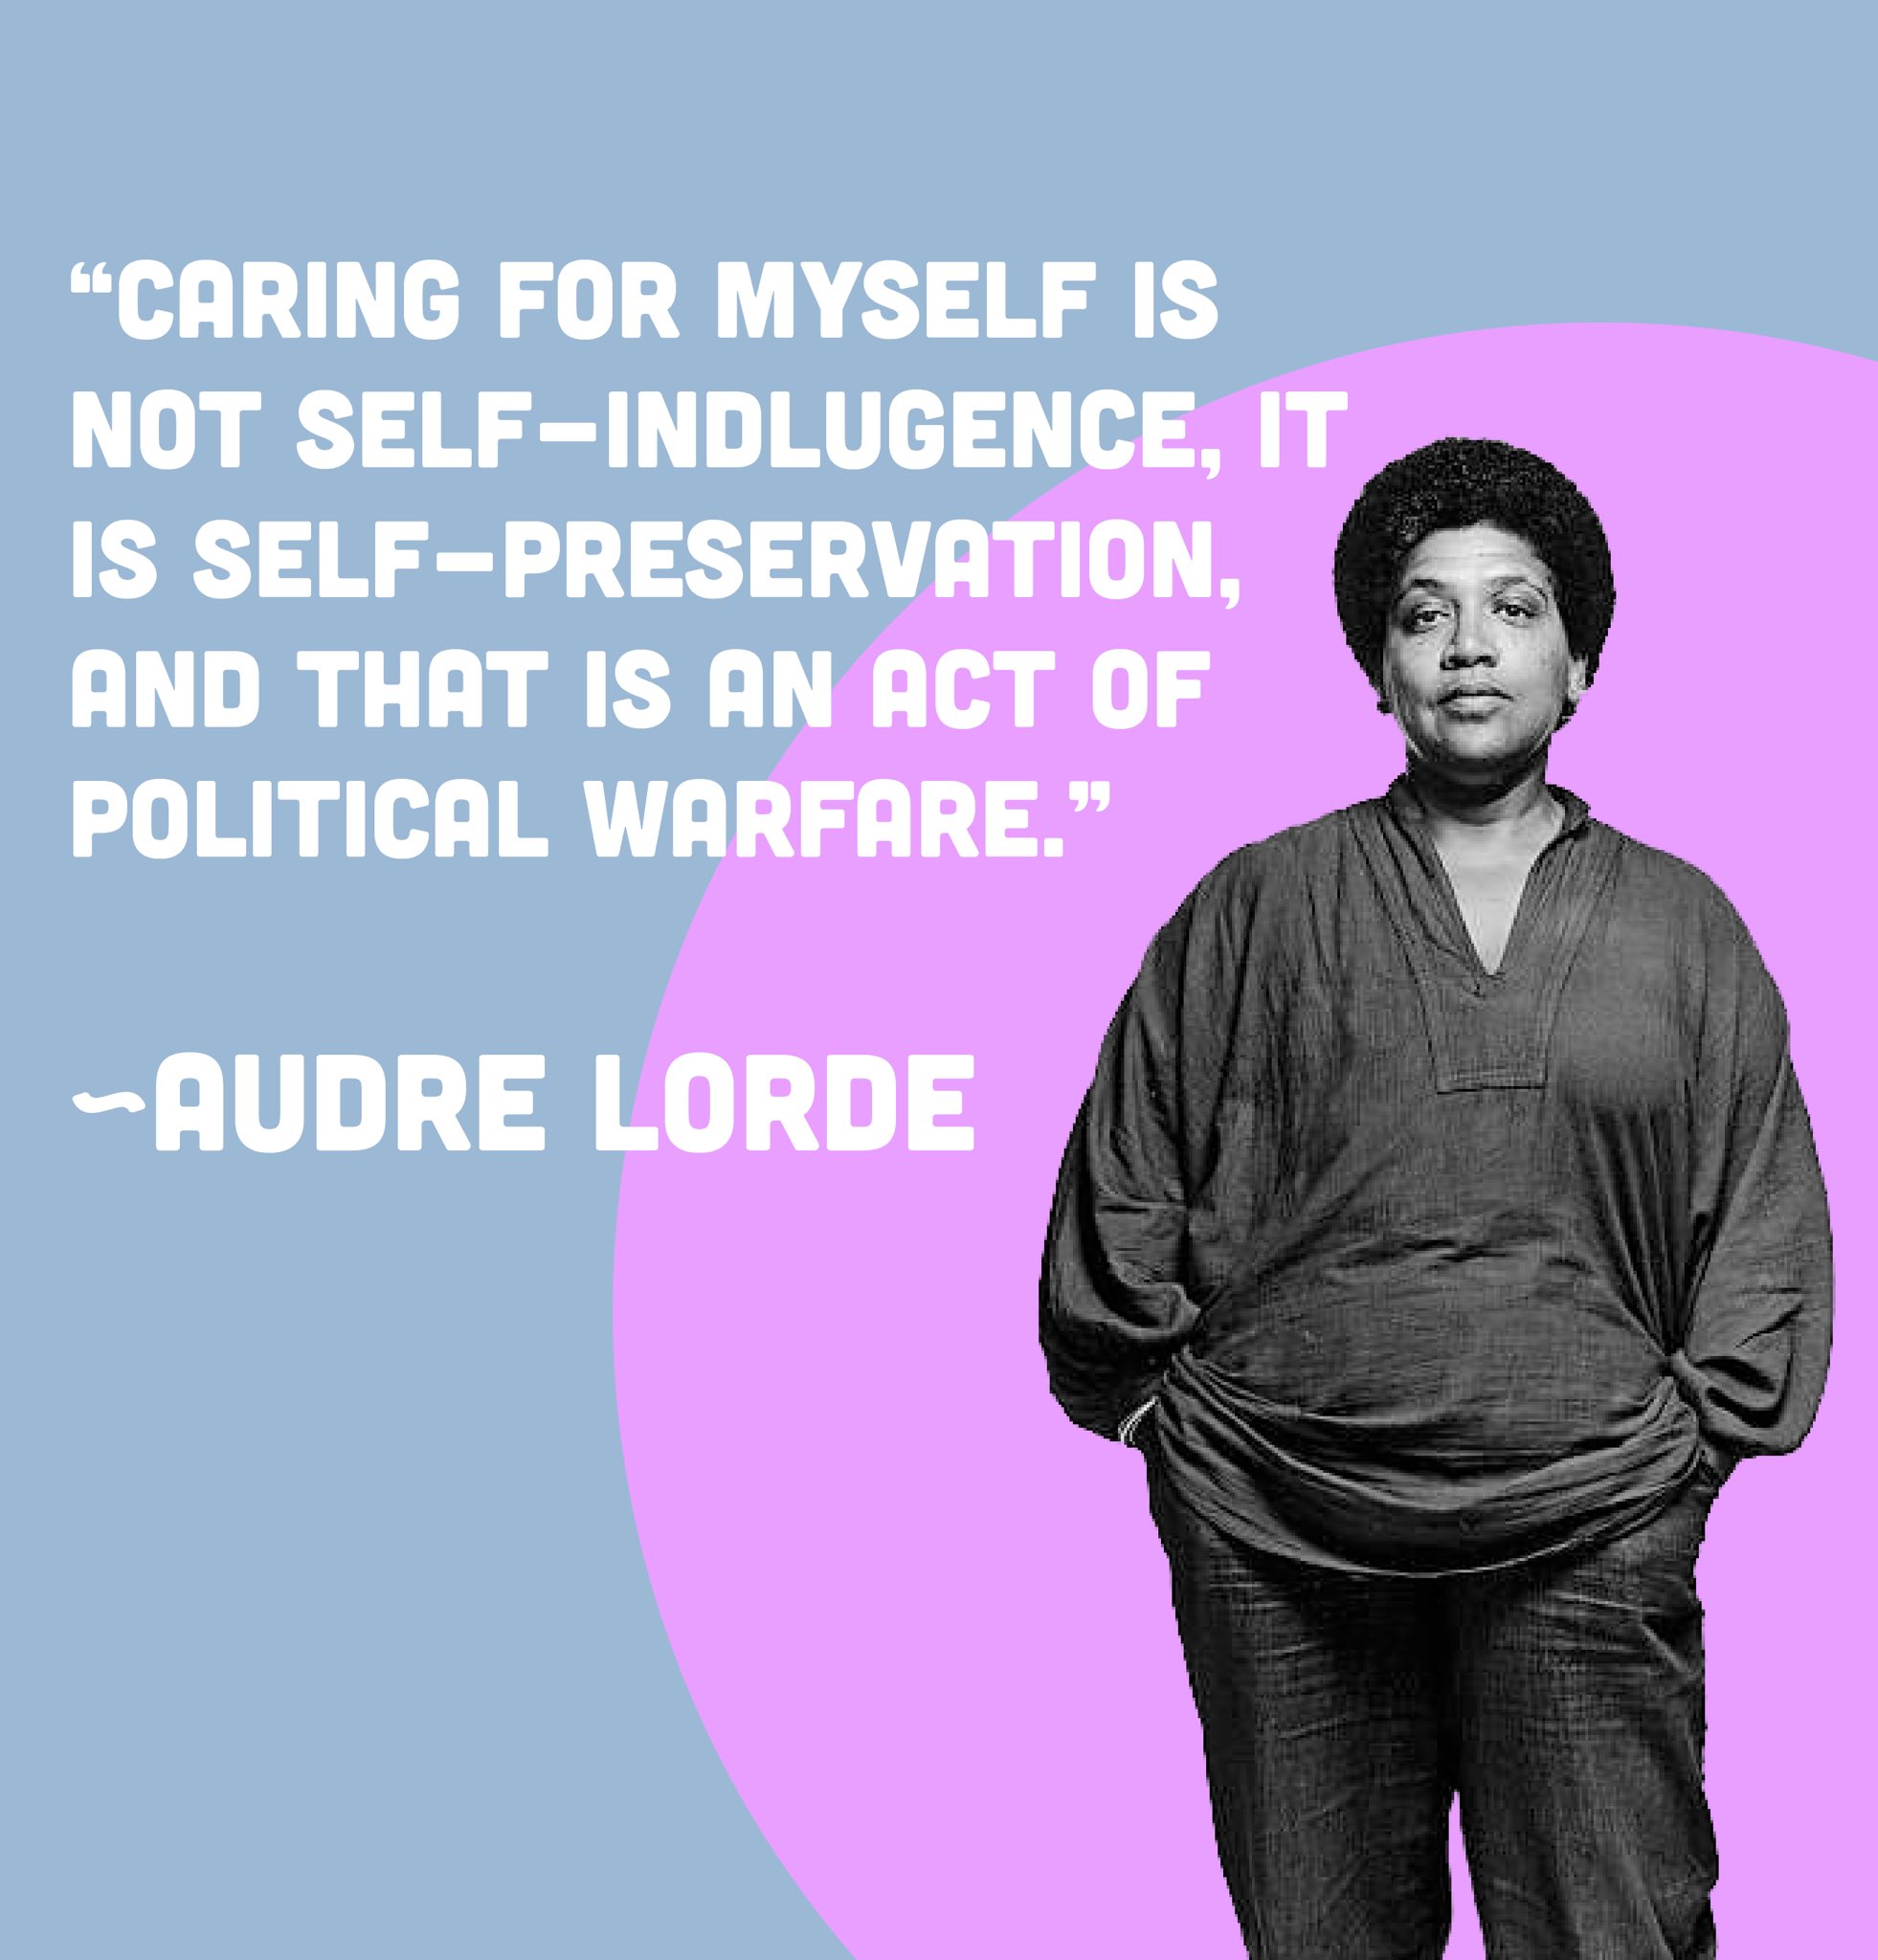 Audre Lorde portrait with quote